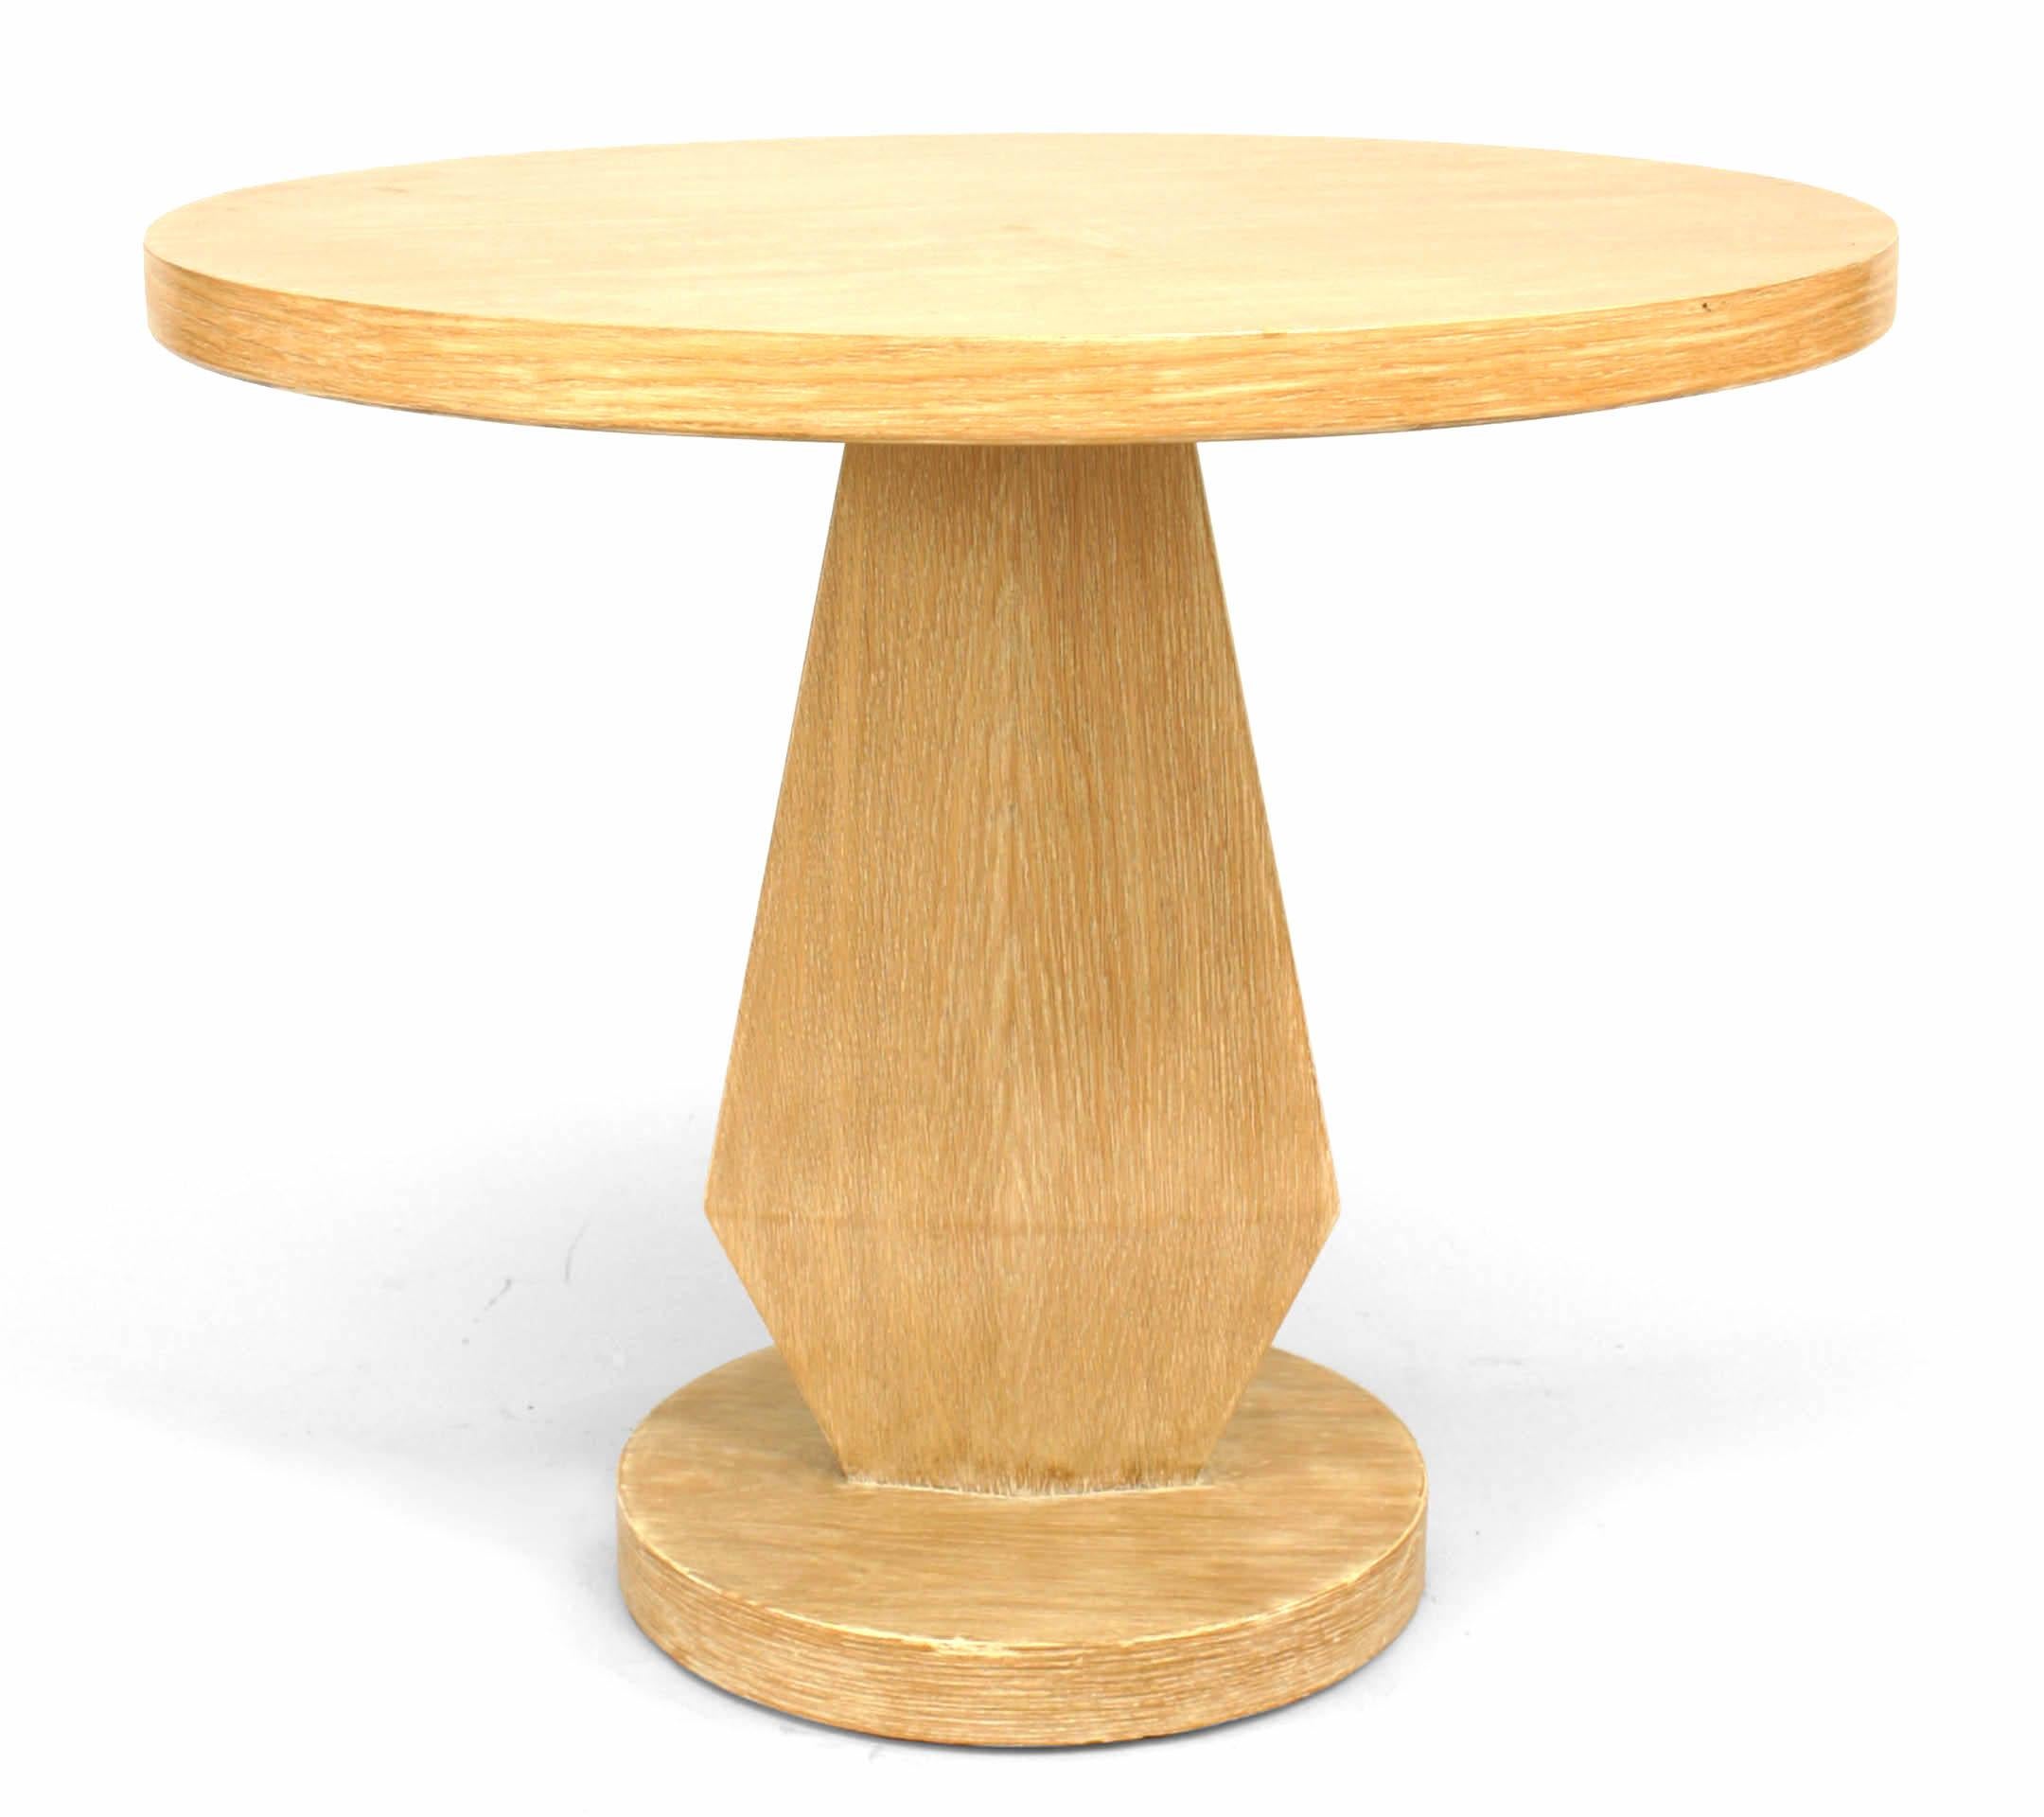 American Mid-Century (1950s) limewood round end table supported on a geometric shaped pedestal base
